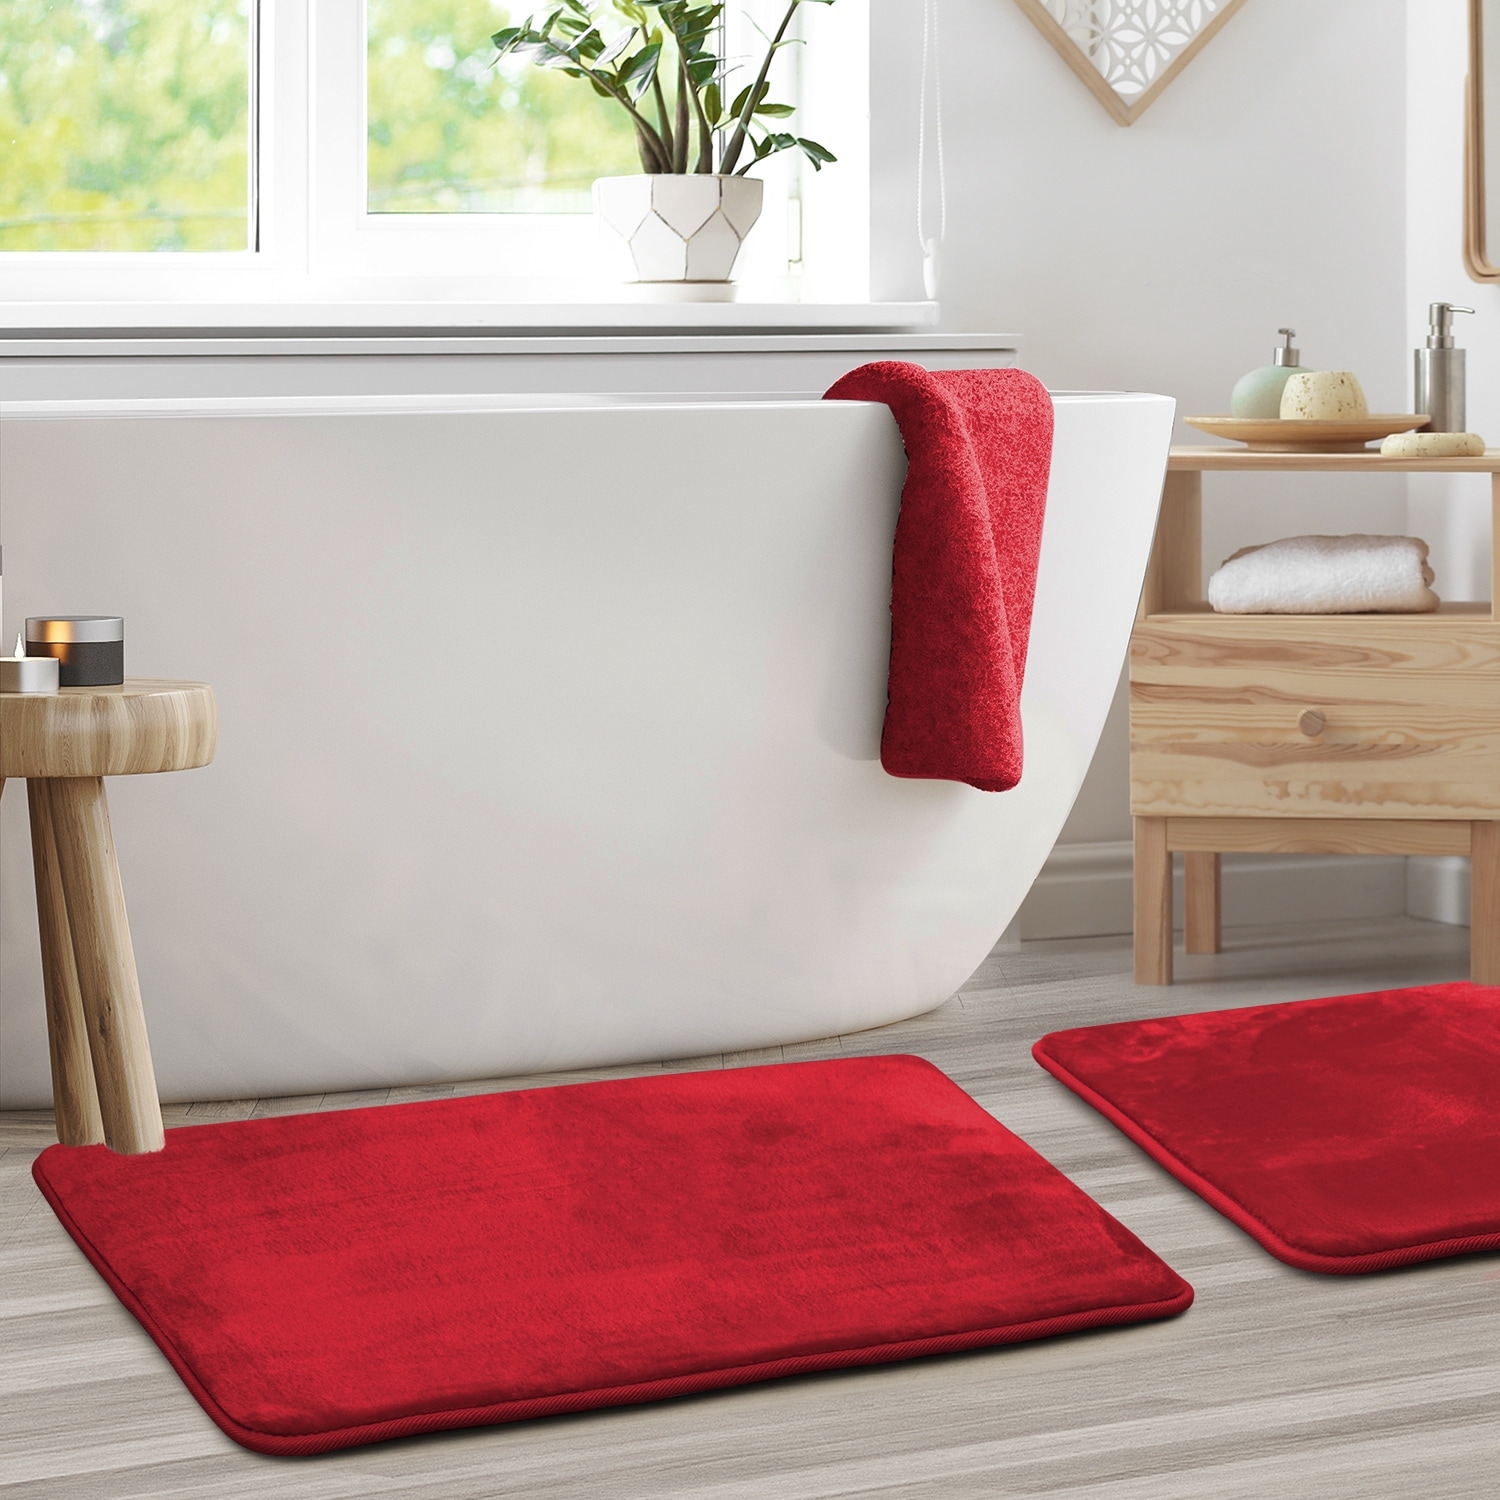 Bathroom Rug Set Of 2 – Memory Foam Bathmats With Embossed Coral Fleece Top  – Non-slip Absorbent Rugs For Shower Or Laundry By Lavish Home (brown) :  Target